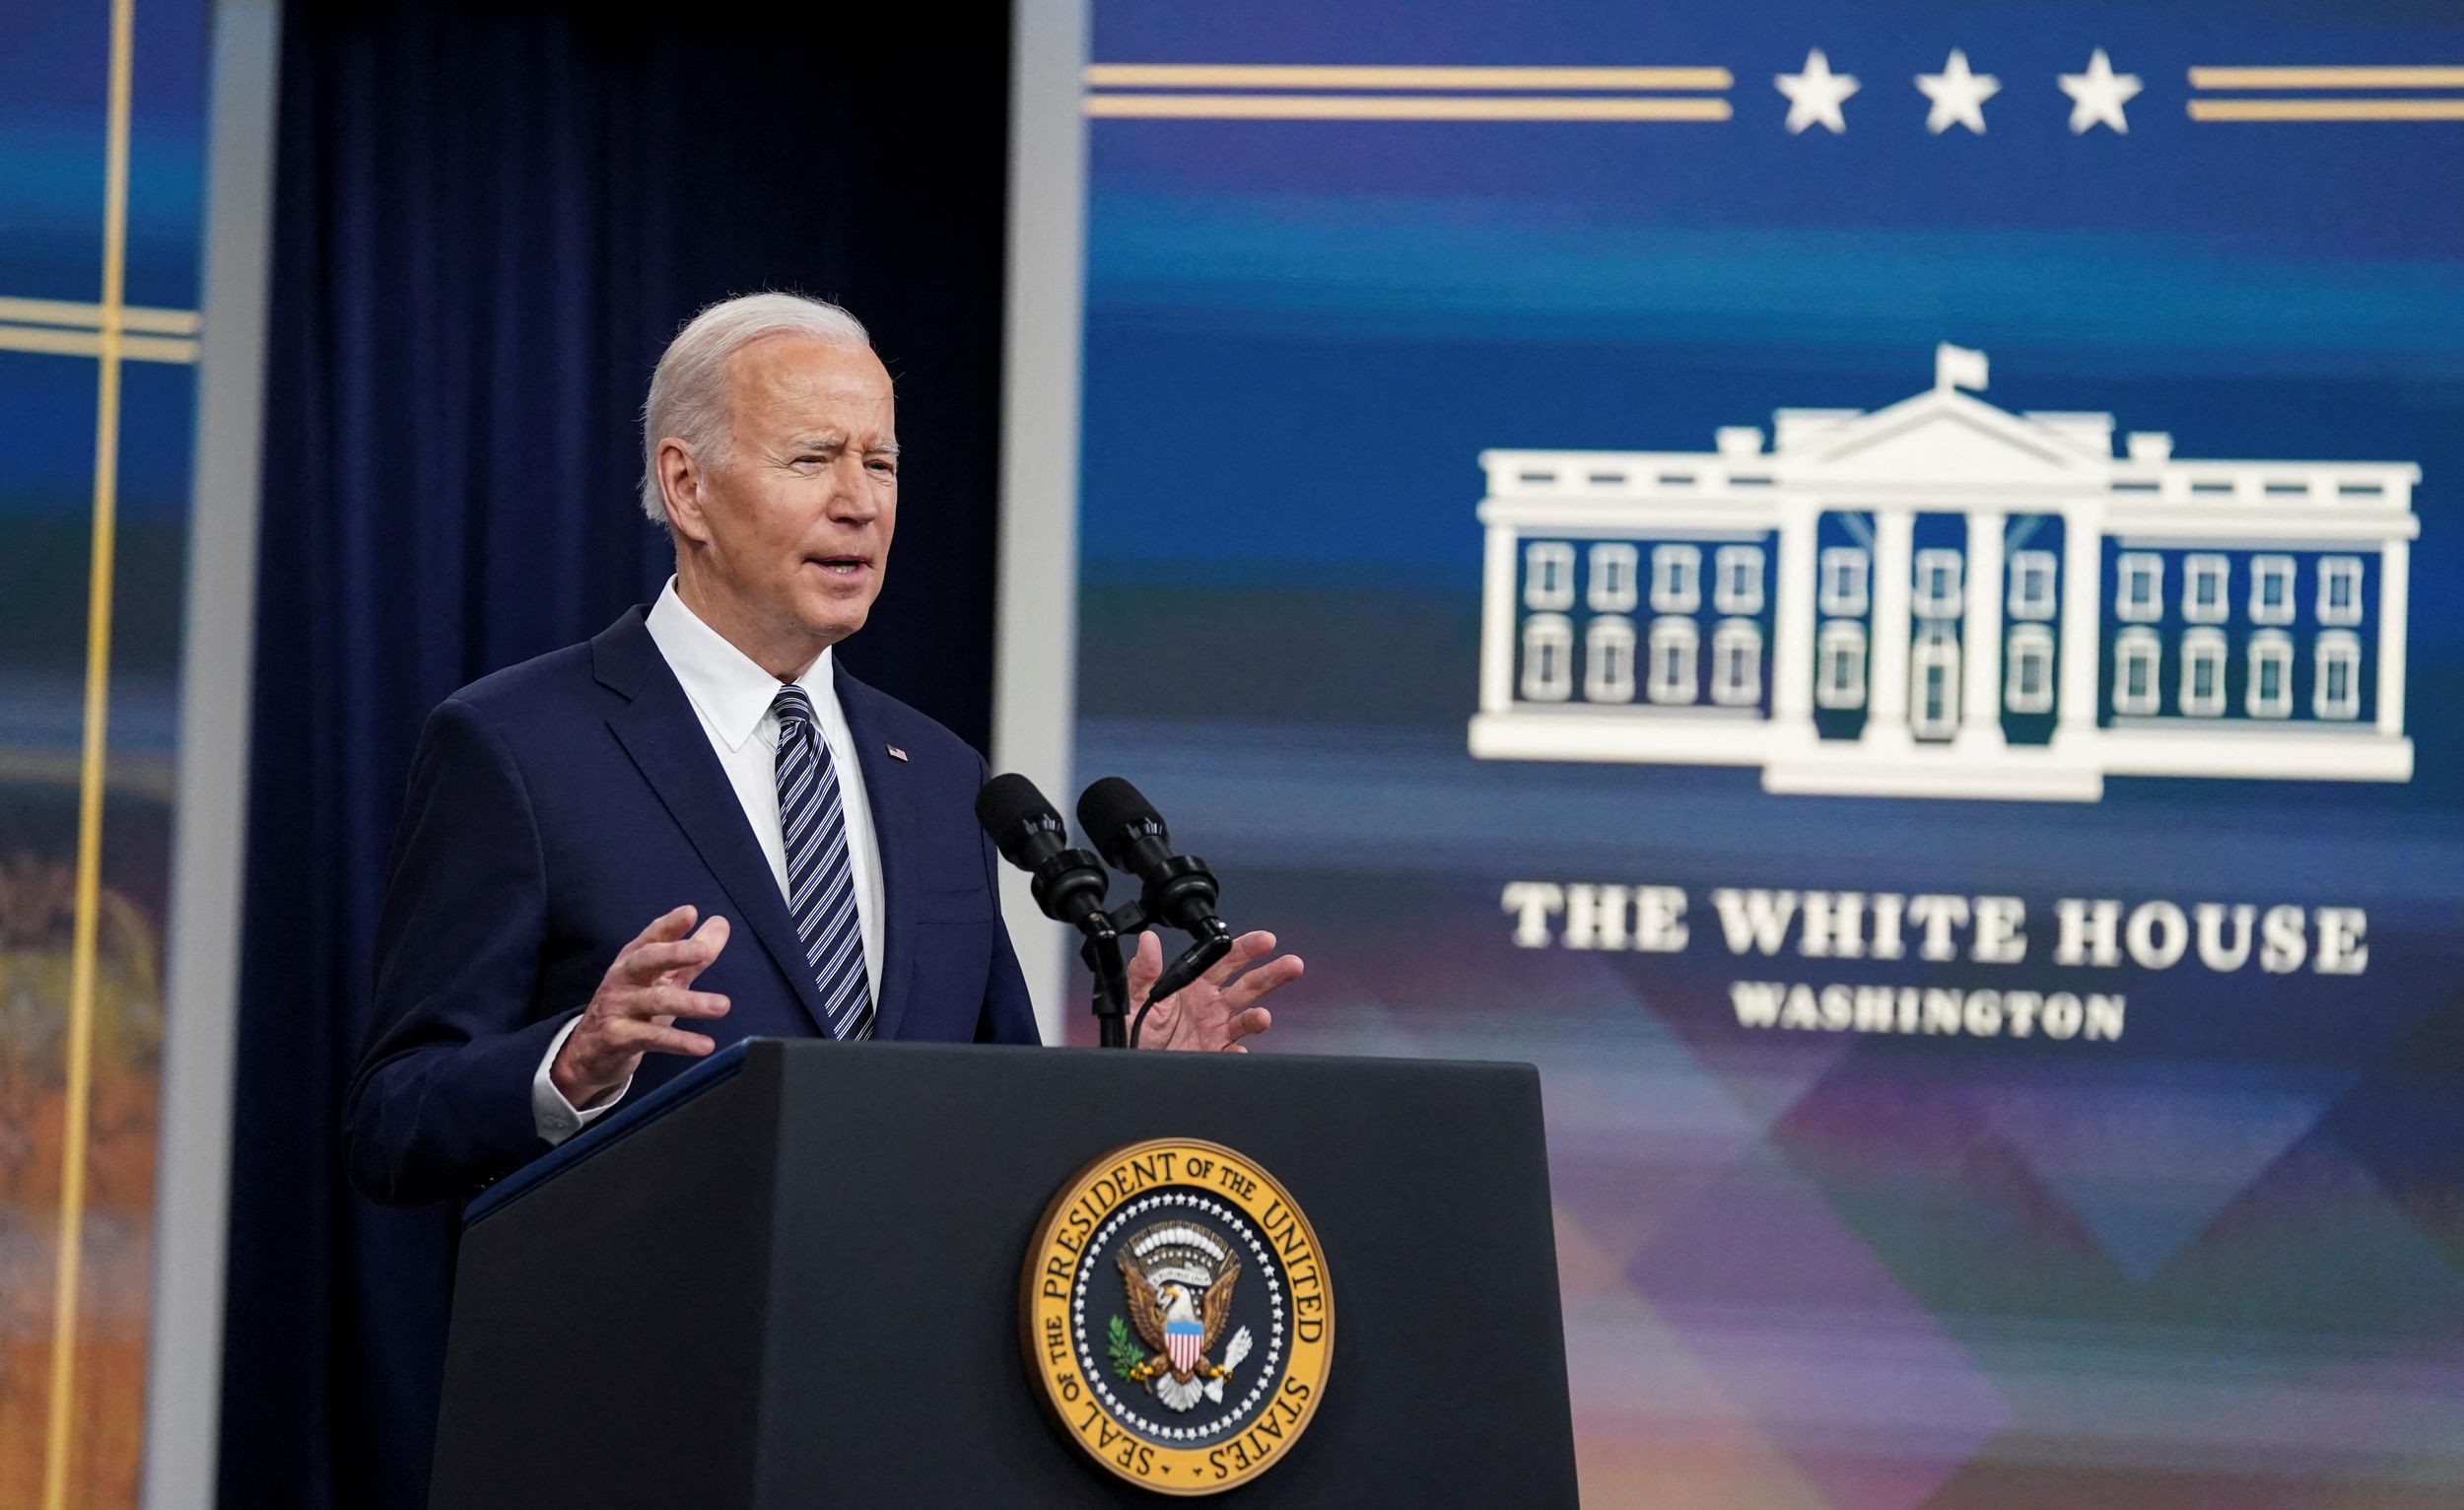 What We're Watching: Biden moves on oil, US-Russia info wars, Costa Rica's vote